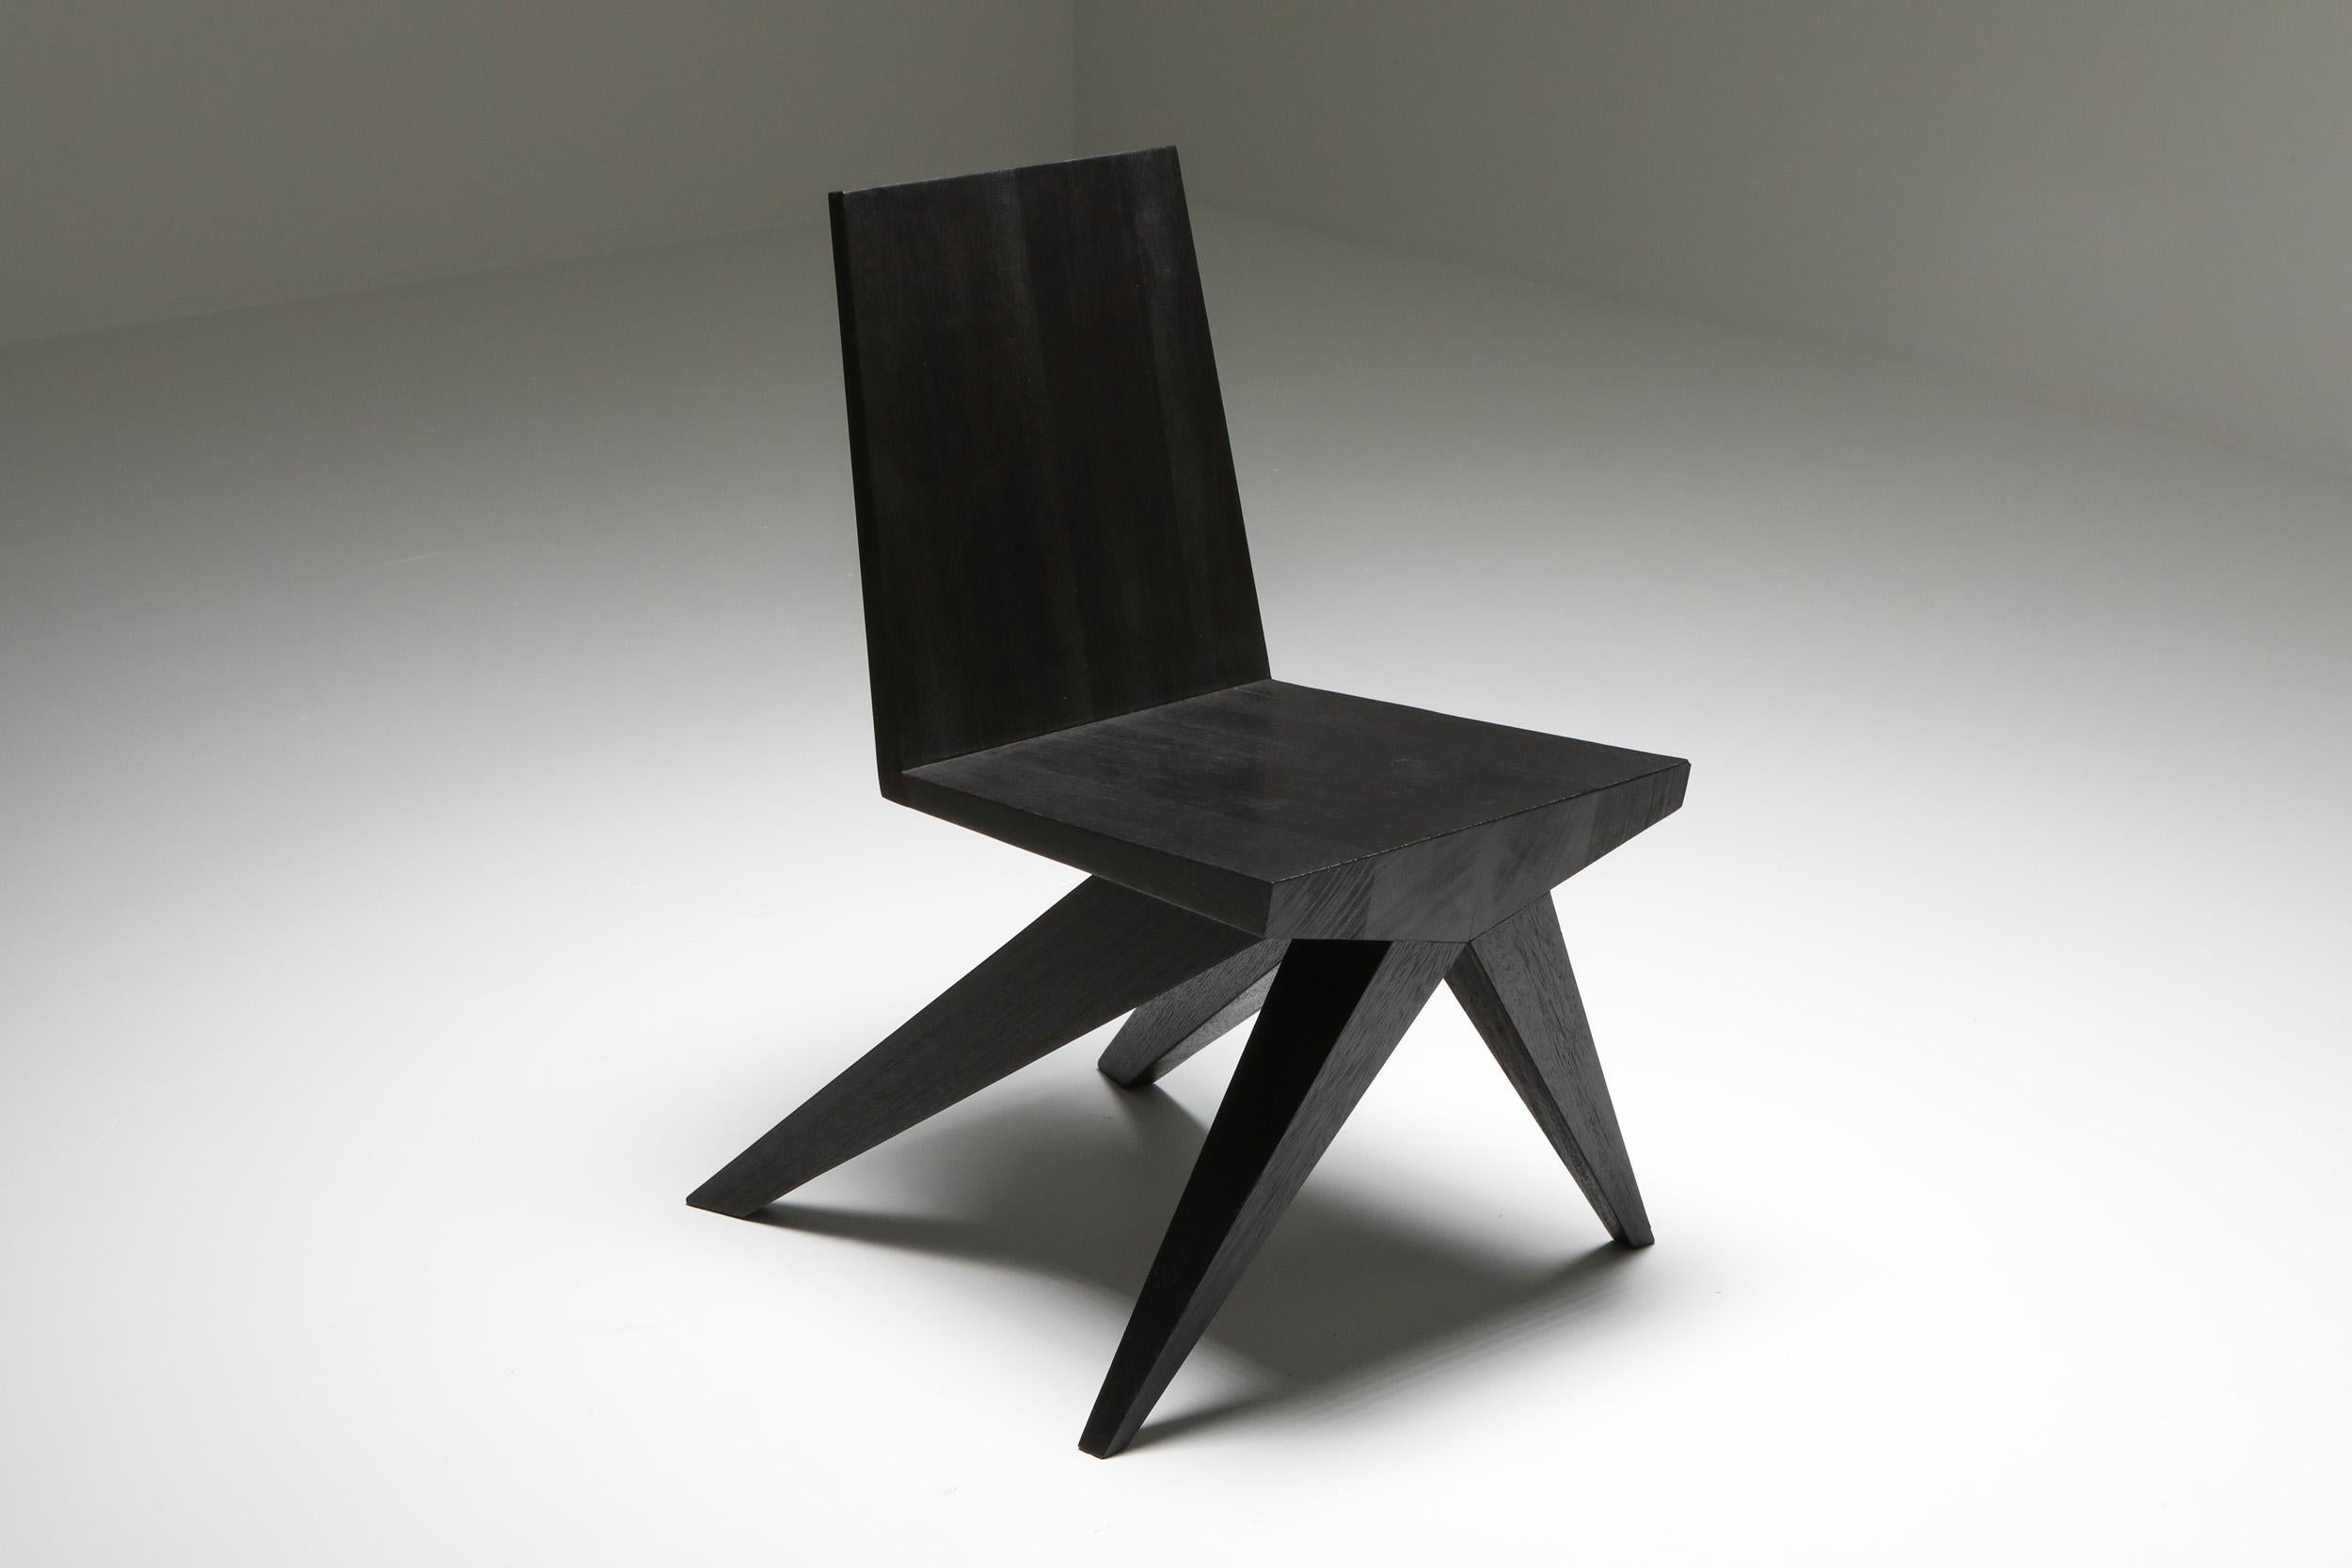 Burnished and waxed Iroko wood. V-dining chair
Arno Declercq, 2020
Black furniture, burnt 
Fits well in an African modernist or Rick Owens inspired decor

Measures: 46 cm wide x 57 cm long x 81 cm high / 18” wide x 22.5” long x 32” high
Seat.